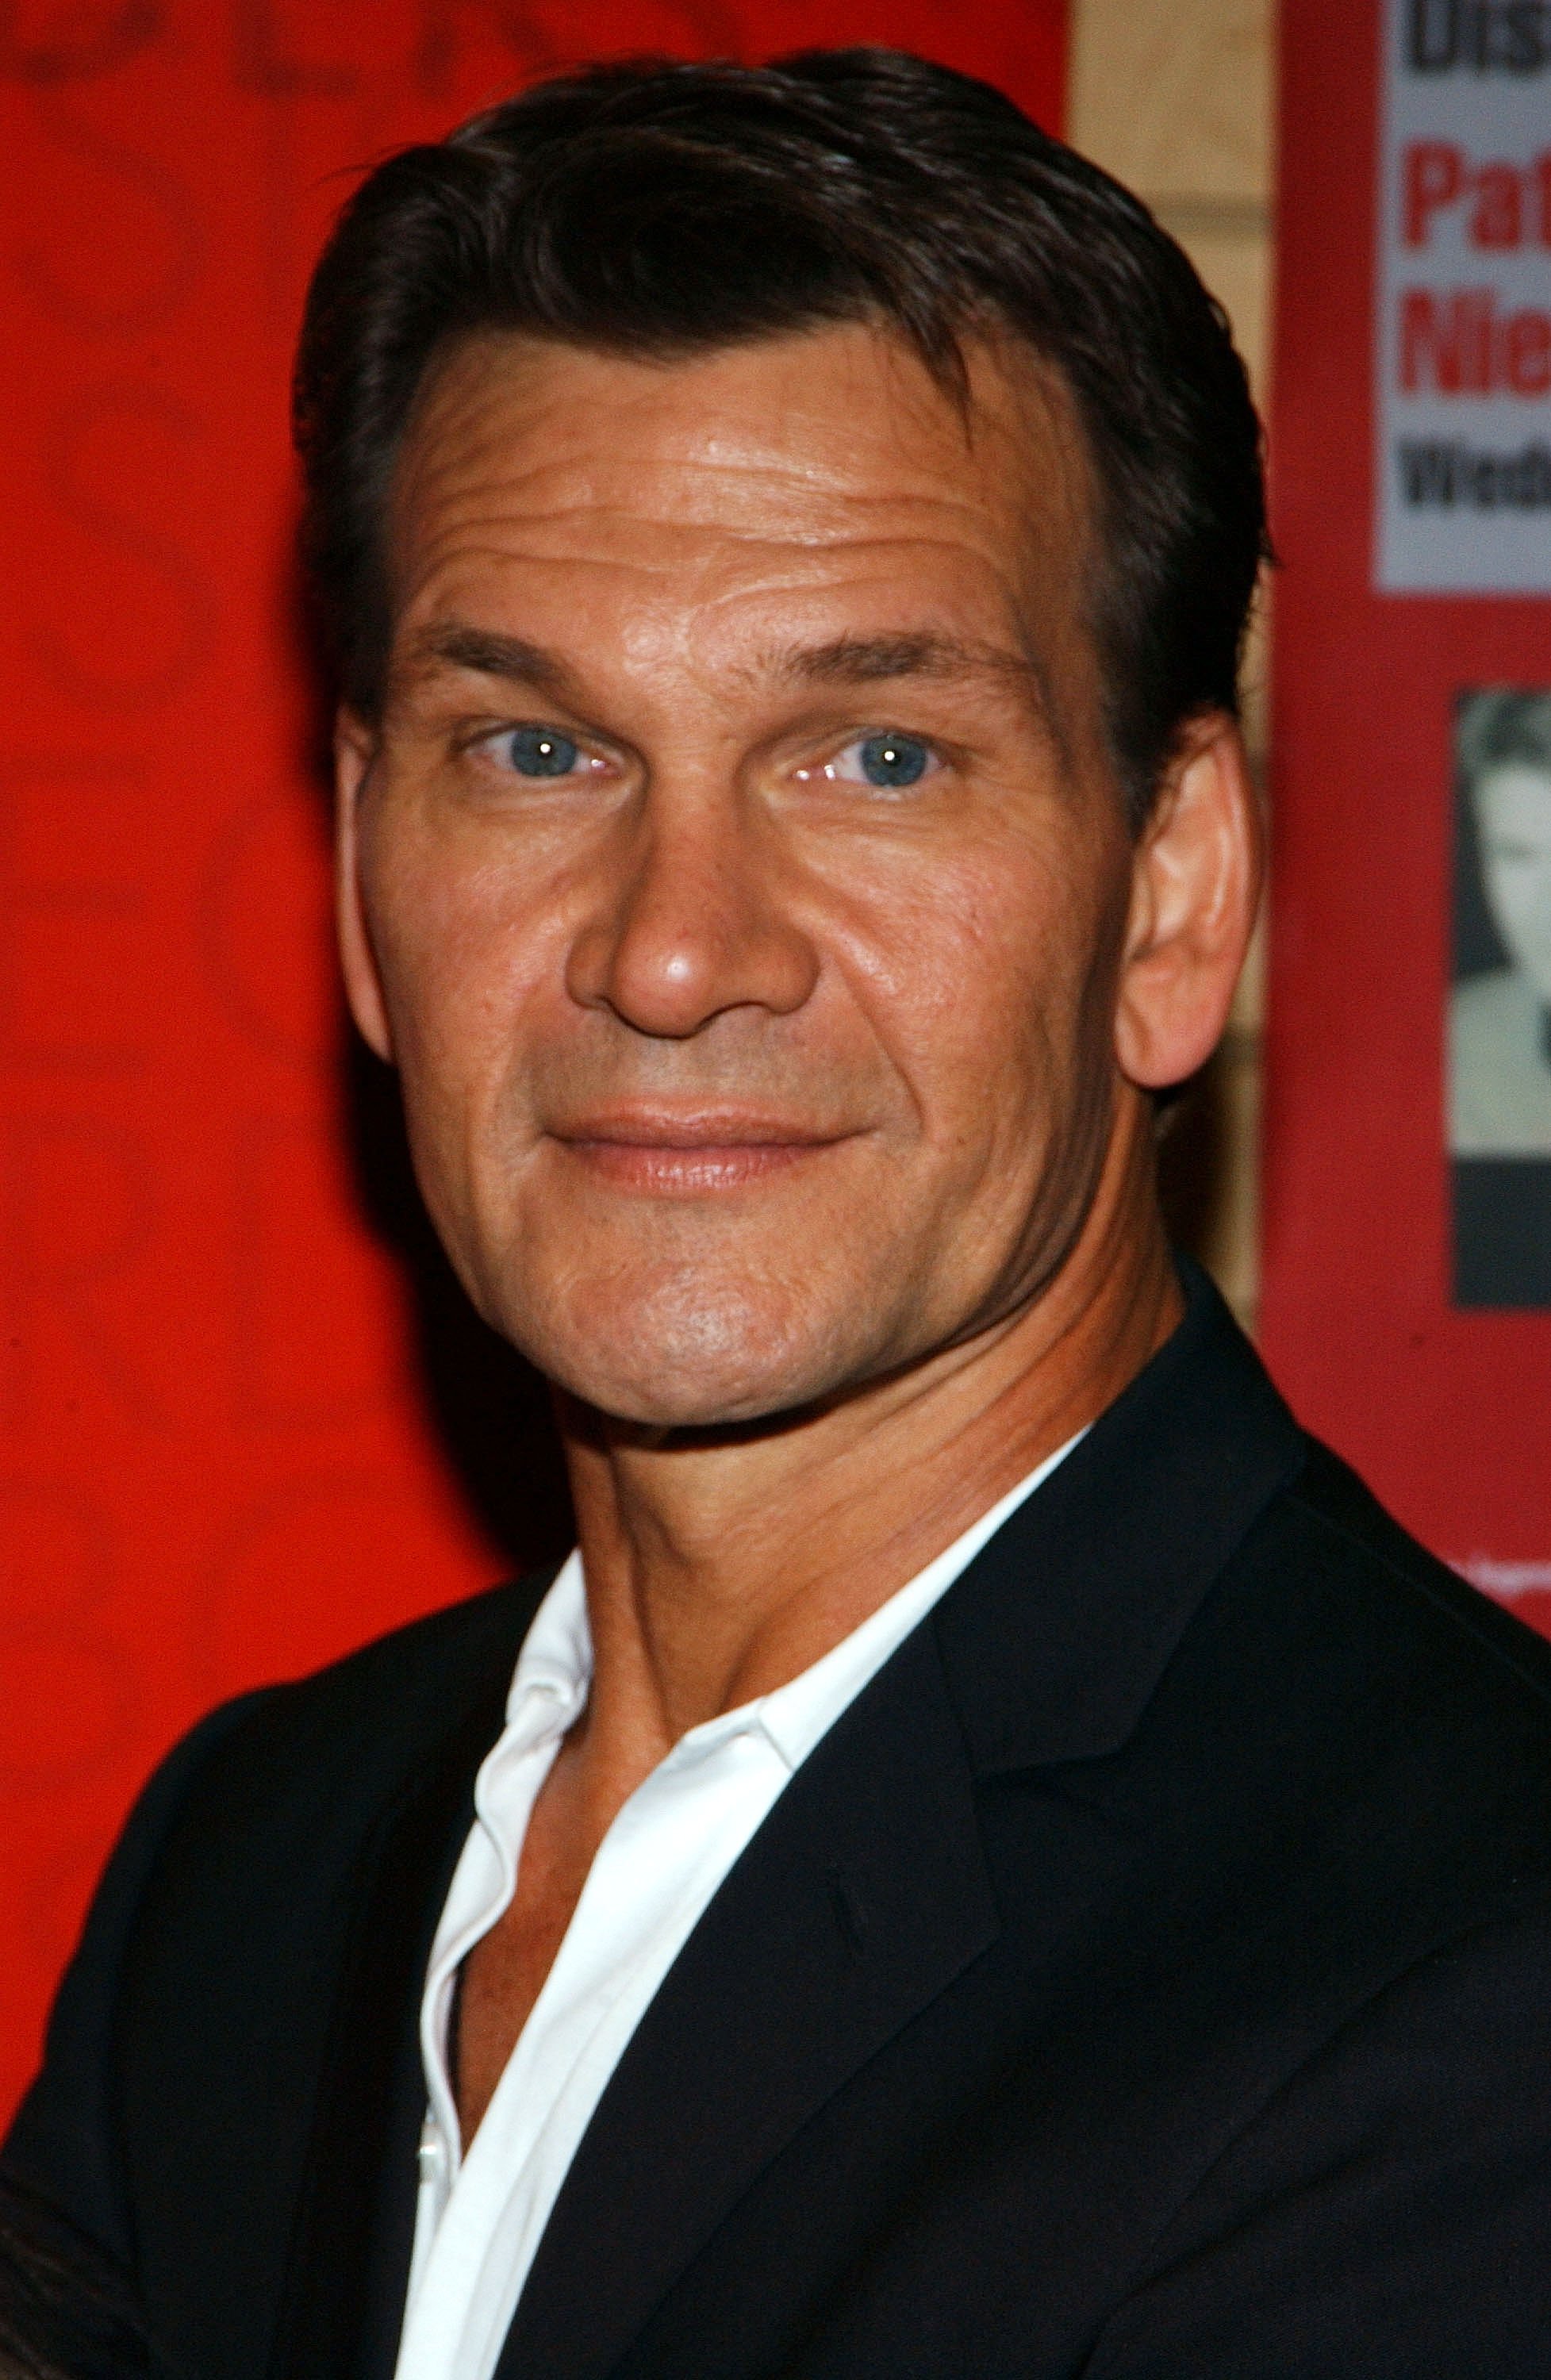 Actor Patrick Swayze appears at Borders Bookstore to sign copies of his new movie "One Last Dance" August 24, 2005 in New York City. | Source: Getty Images